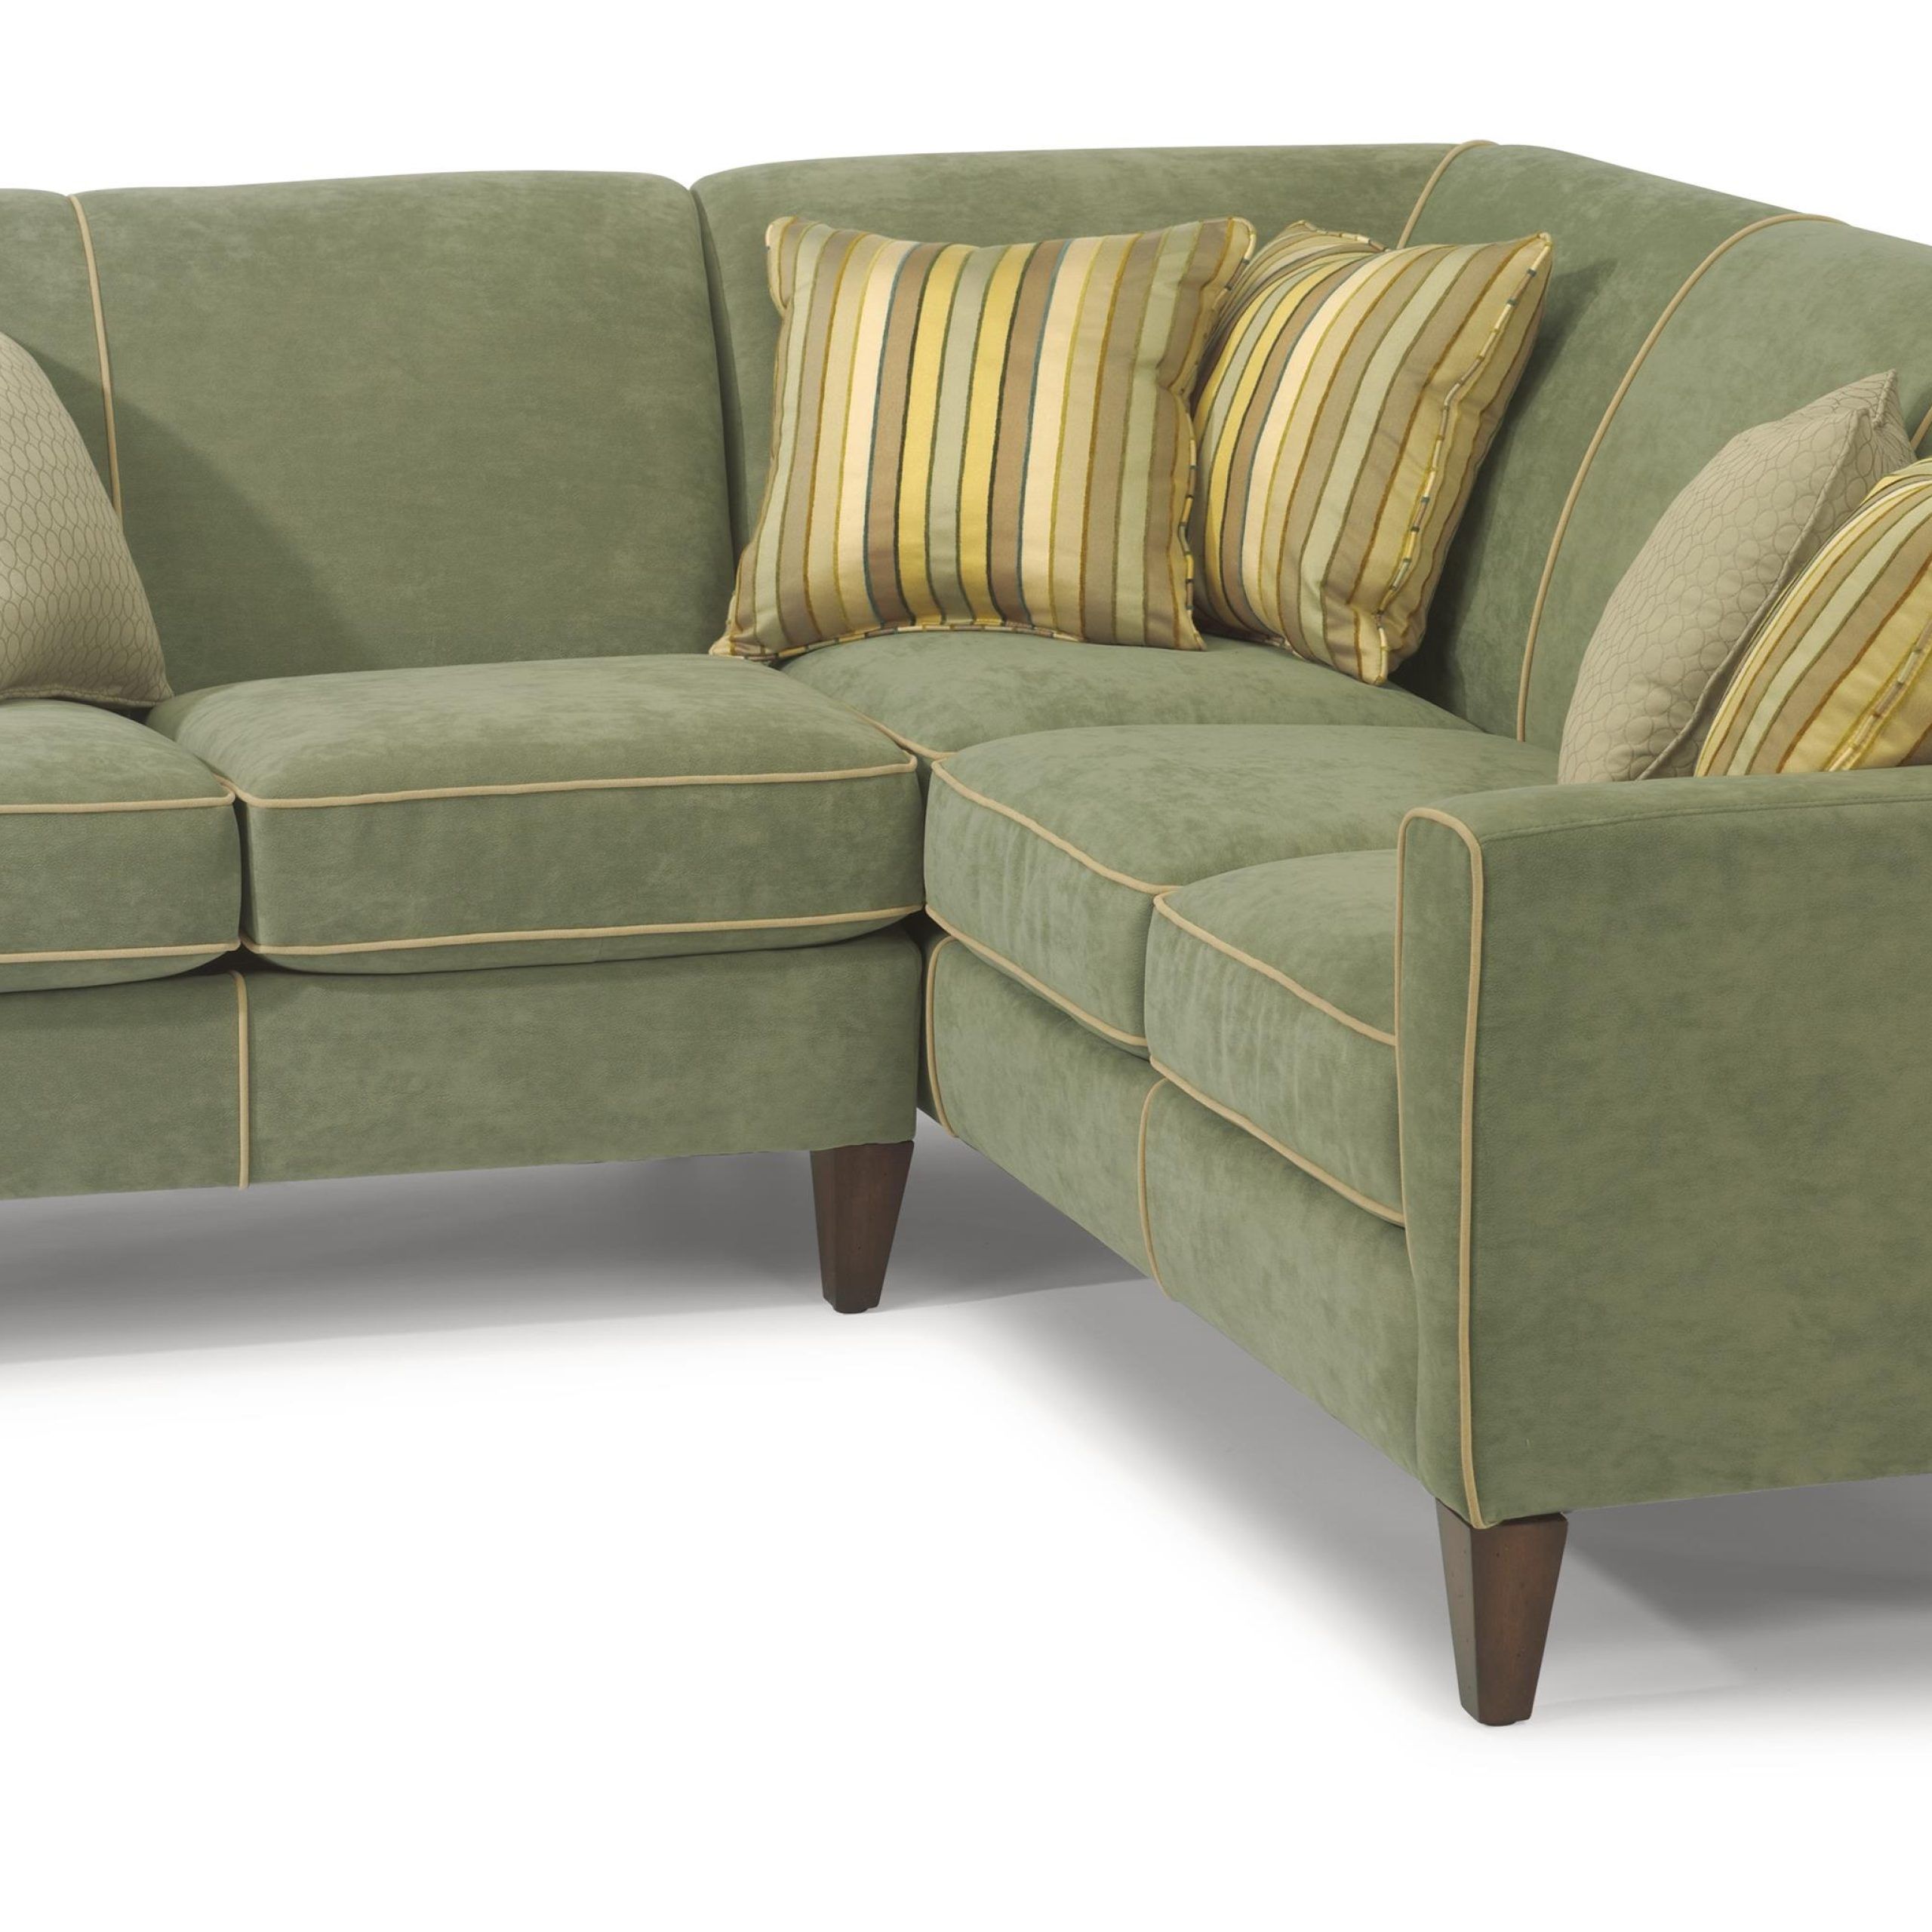 Flexsteel Digby 3966 28x1+3966 33x1 430 24 Contemporary L Shape In Modern L Shaped Sofa Sectionals (View 7 of 20)